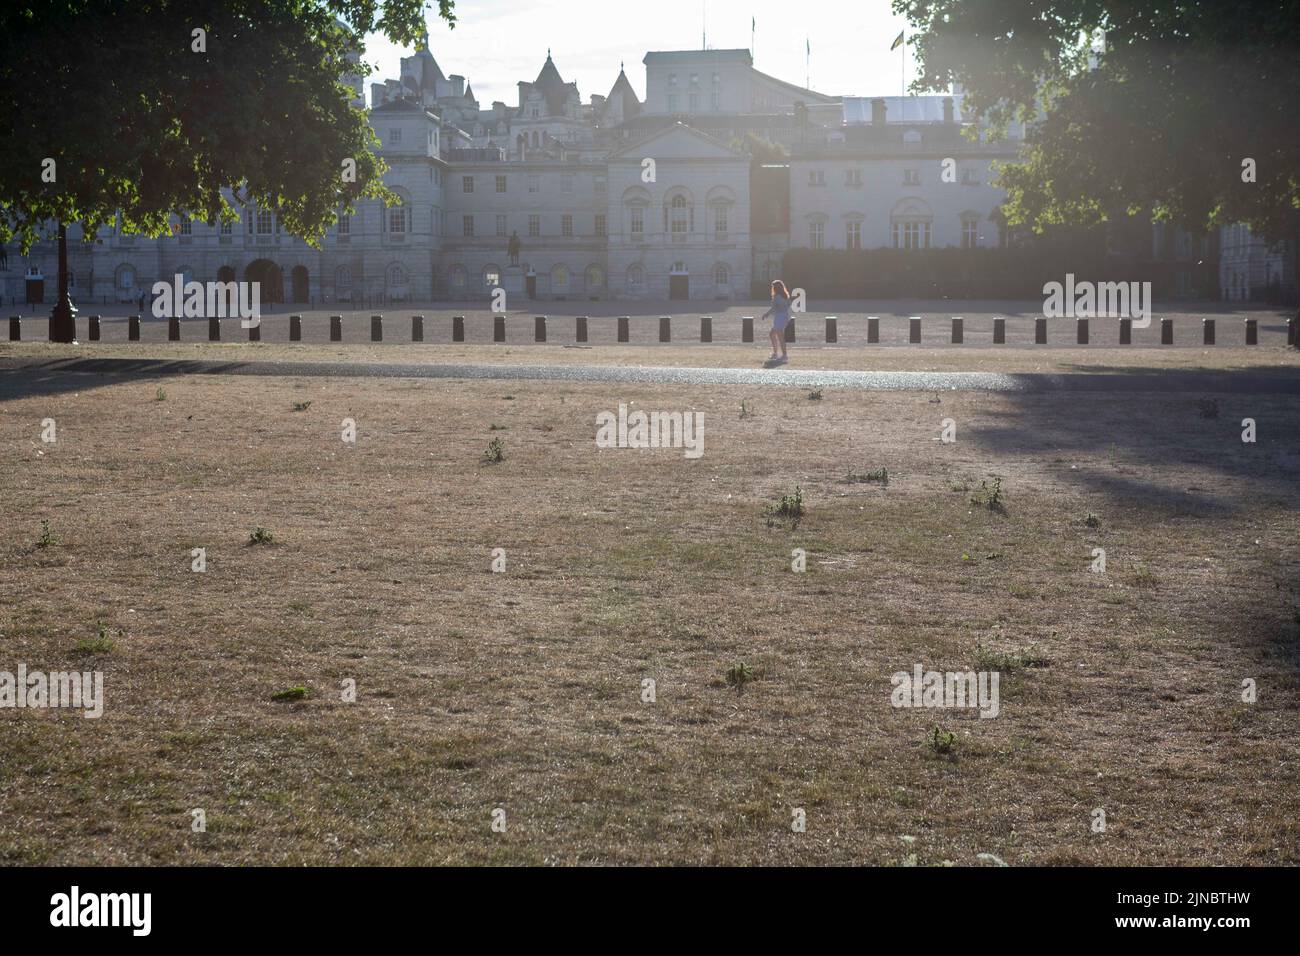 Grass is seen to be parched at St. James’s Park this morning. UK is currently experiencing dry weather.   Image shot on 4th Aug 2022.  © Belinda Jiao Stock Photo